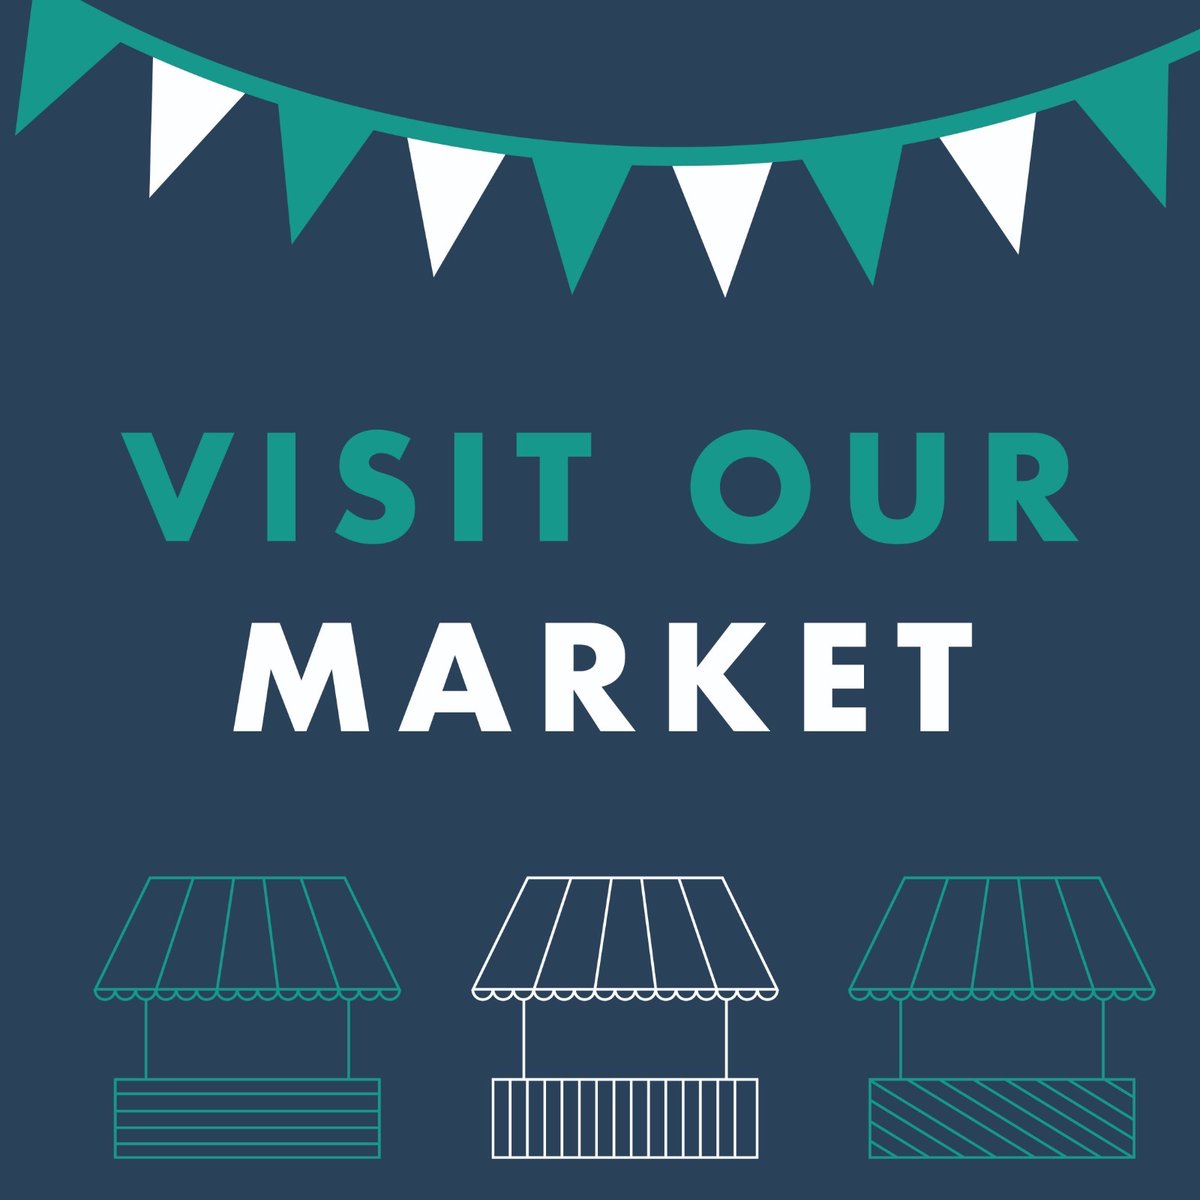 Visit our market! 🍎🧶 Our market is on till 3pm today and from 8am-3pm Saturday! ✨ We've got many new market stalls, so why not pop along and find out, aswell as doing some shopping in our local shops nearby! 🛍